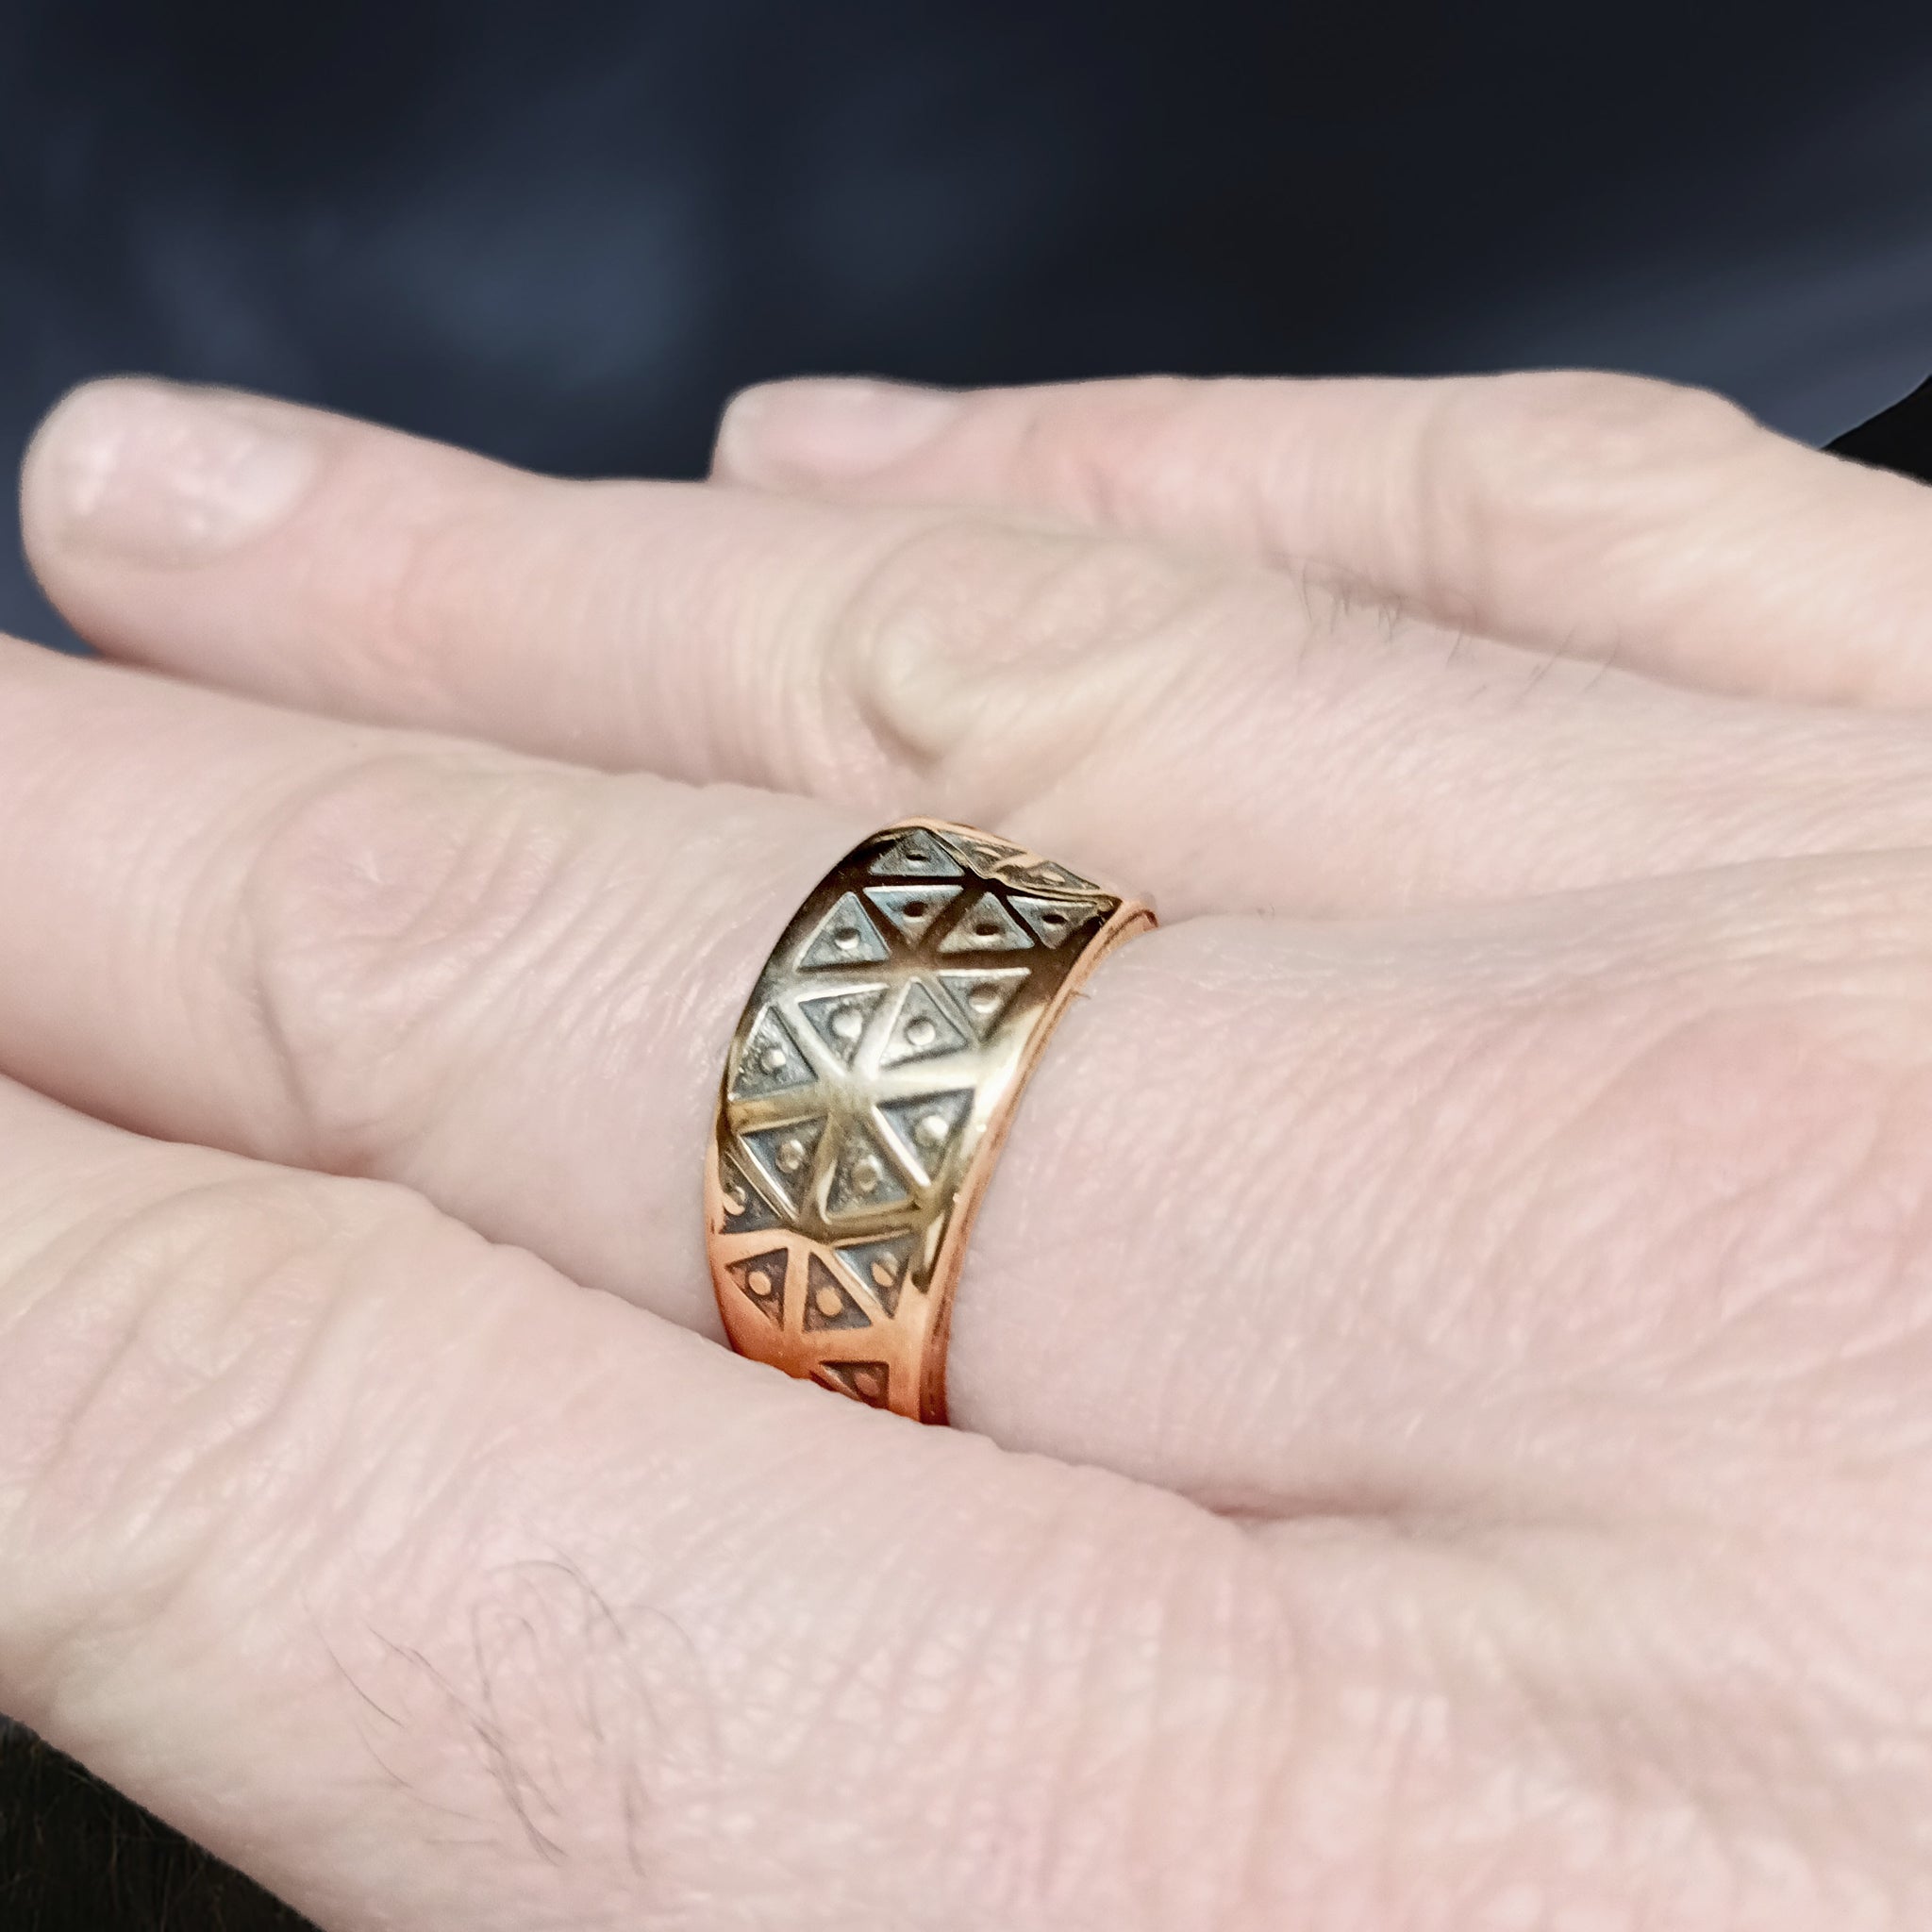 Bronze Replica Viking Ring with Stamped Viking Design on Finger - Large Size